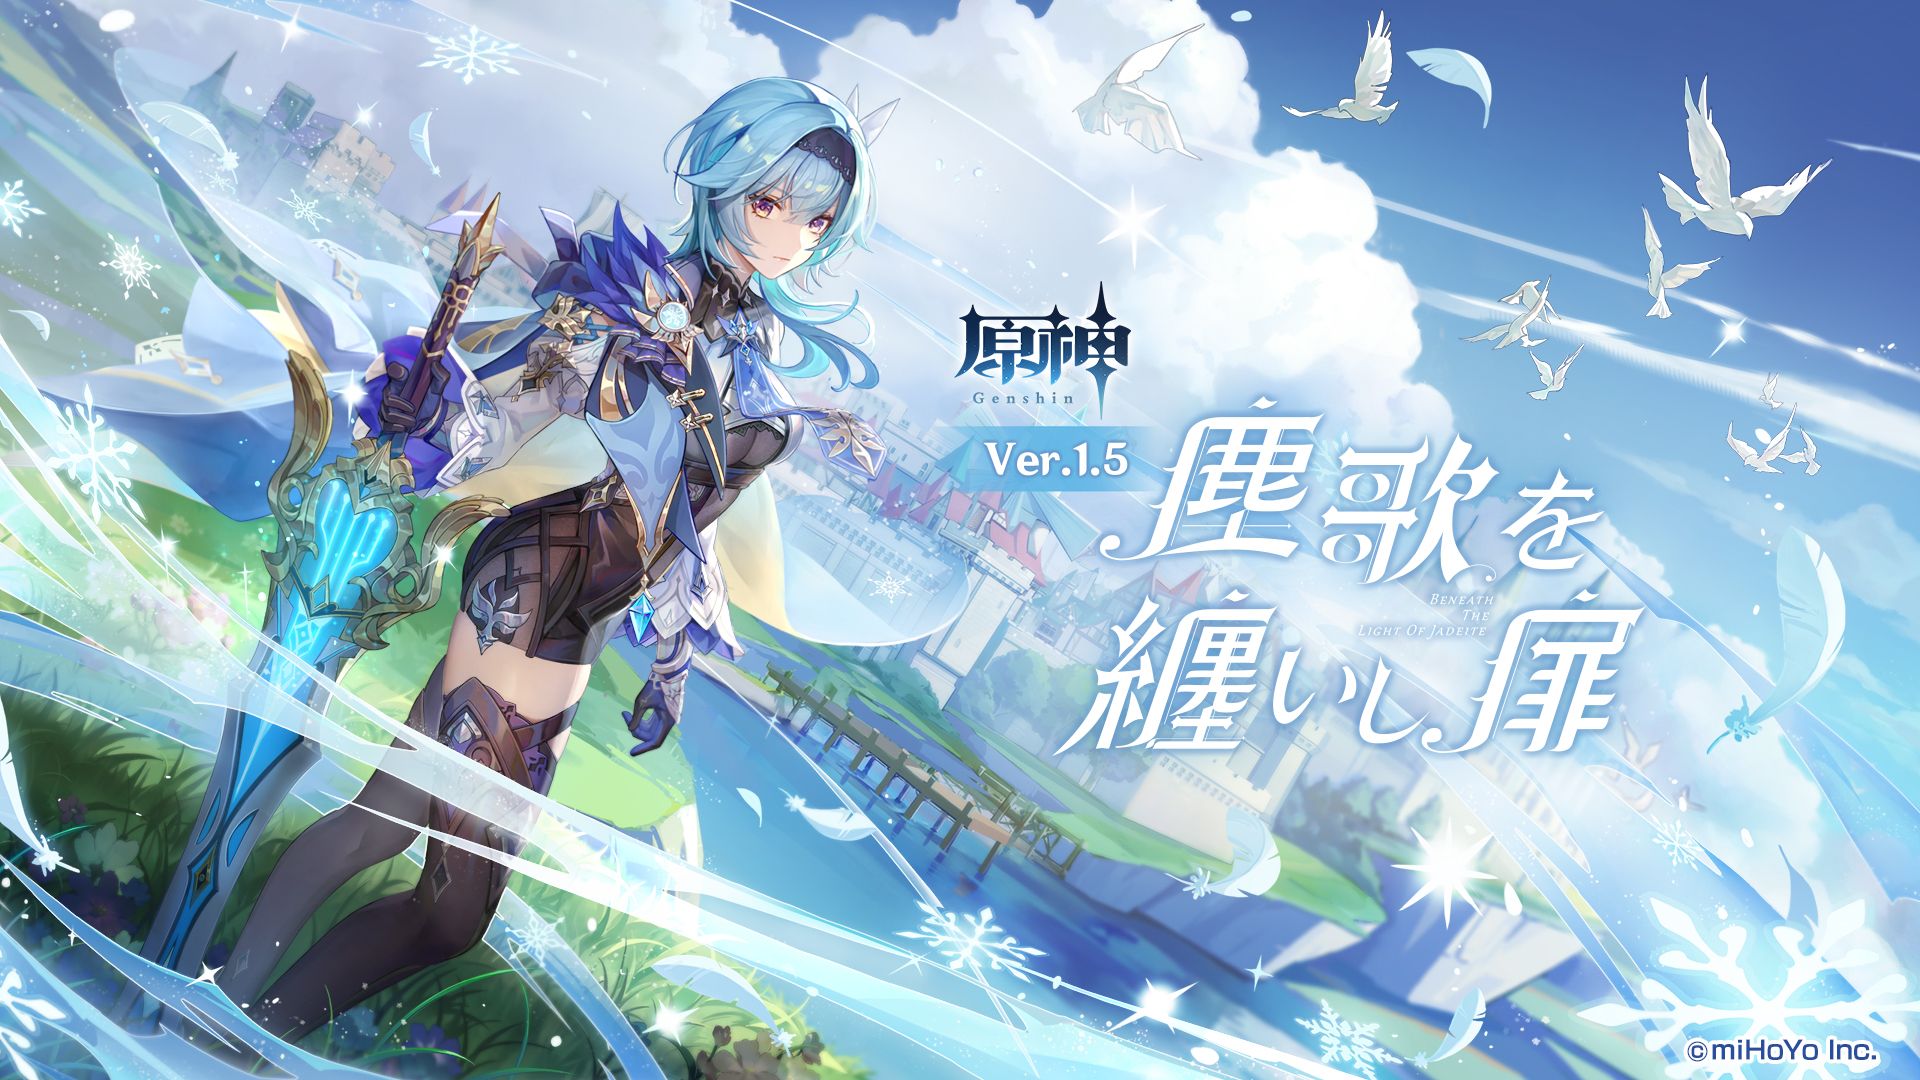 patch notes Genshin Impact 1.5 free primogems new feature eula key visual artwork official